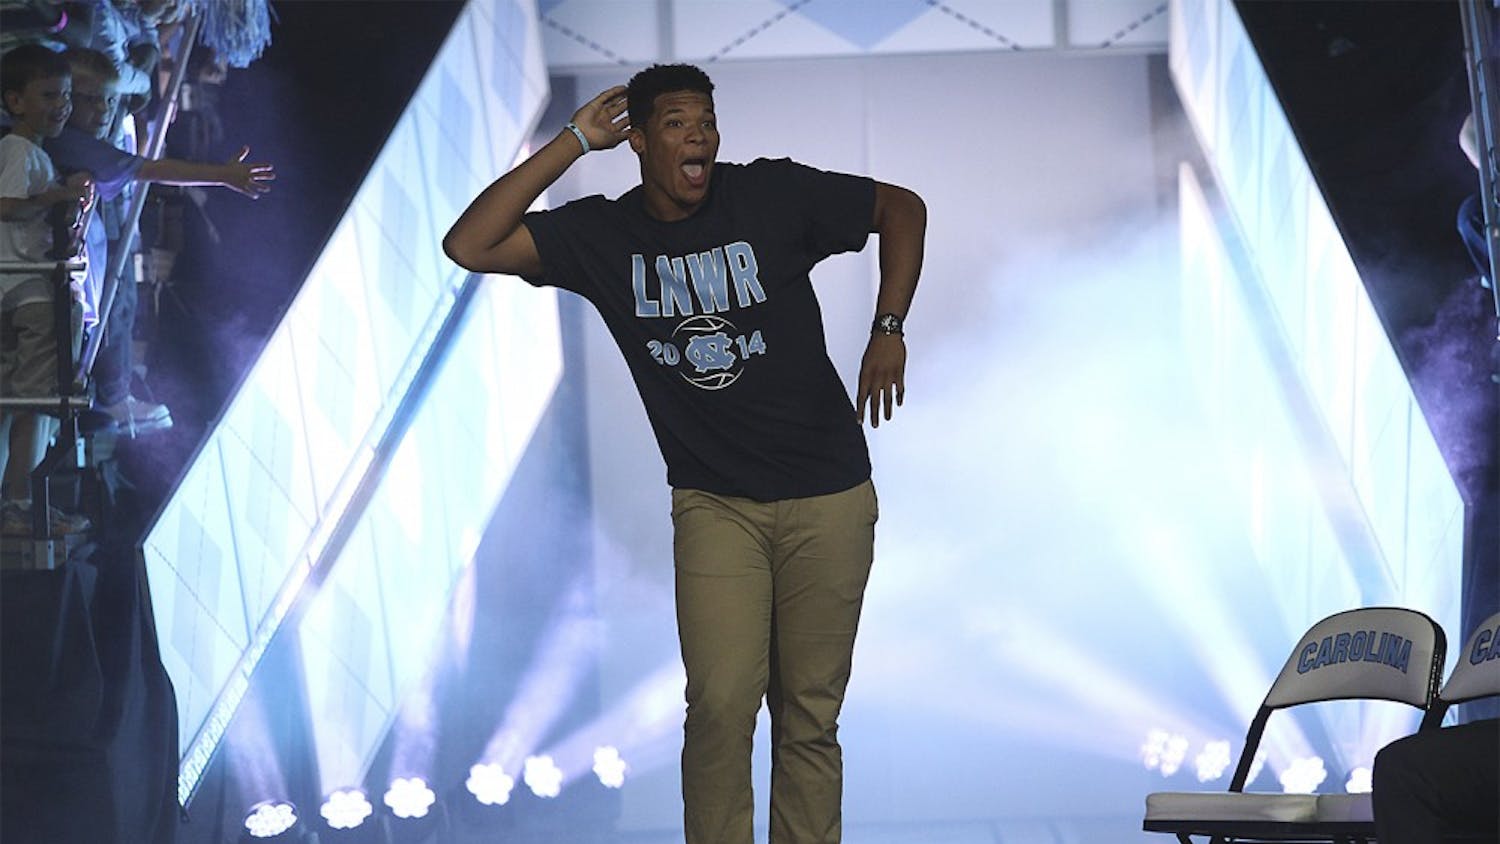 The men's and women's basketball teams took to the Dean Smith Center on Firday for Late Night with Roy, the annual kick-off to basketball season. Both teams played a scrimmage in between skits and dances. 